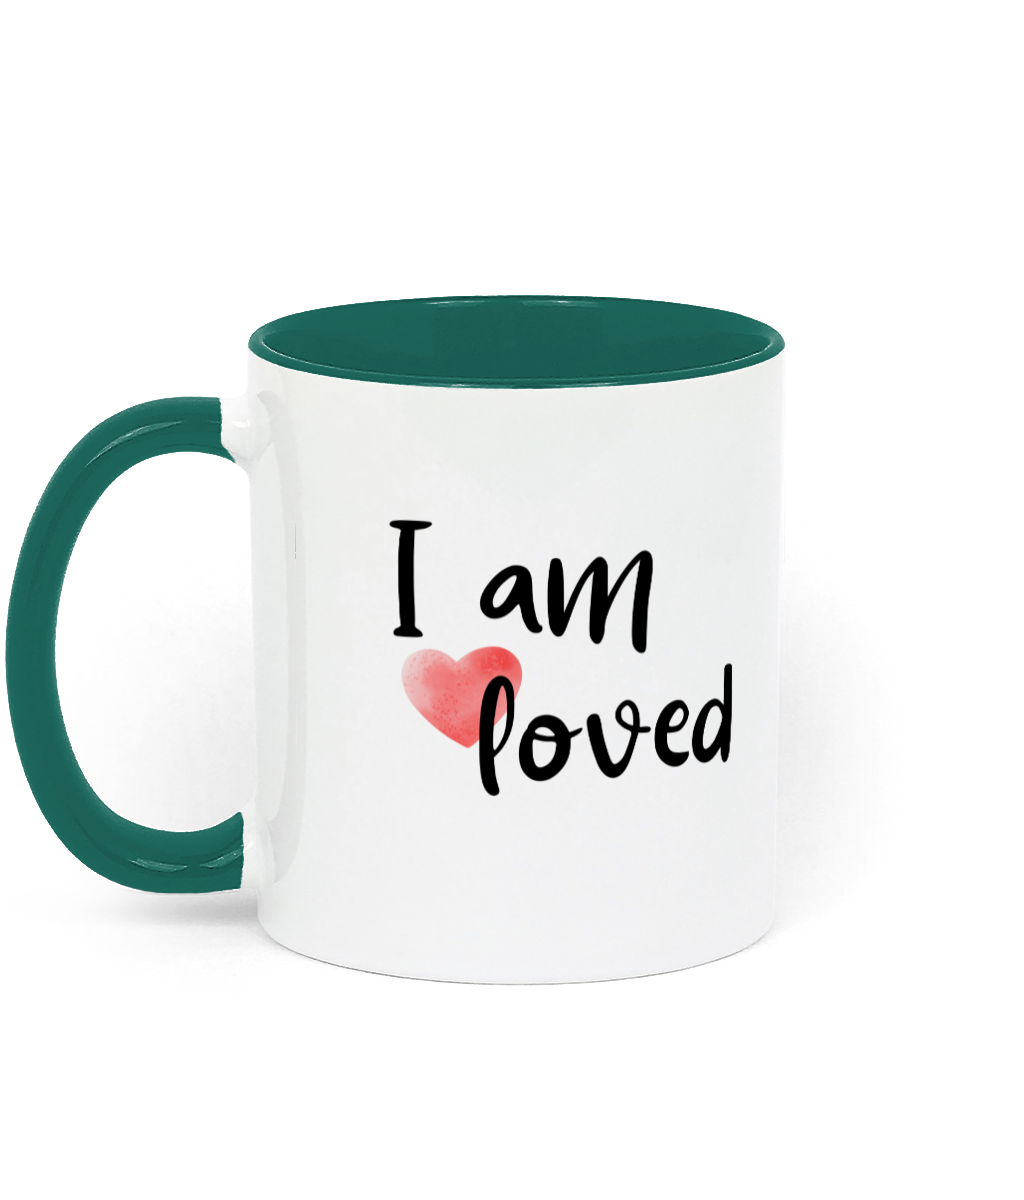 I Am Loved. .11 oz mug. Daily Affirmations, Motivation, Inspiration. Perfect Gift. Two-Toned. Green.